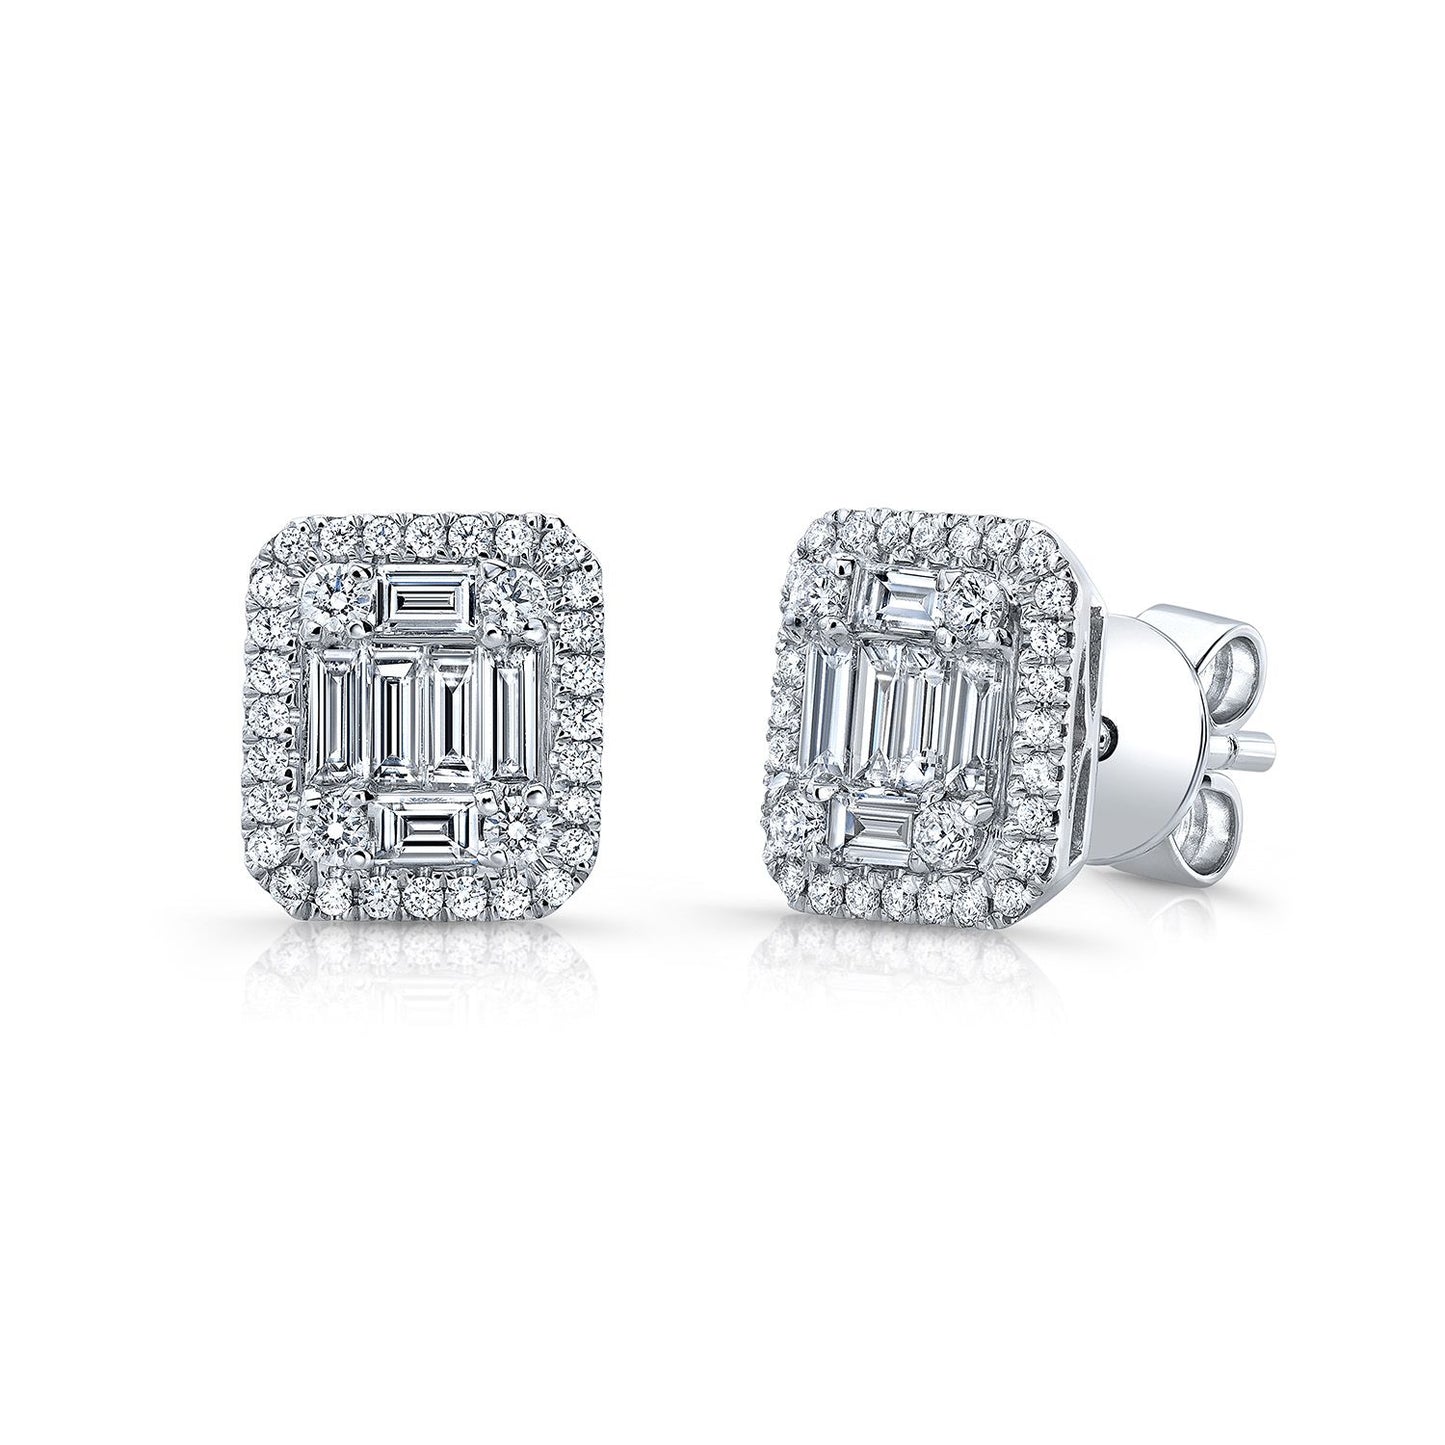 Diamond Baguette And Round Illusion Emerald-cut Halo Earrings In 14k White Gold